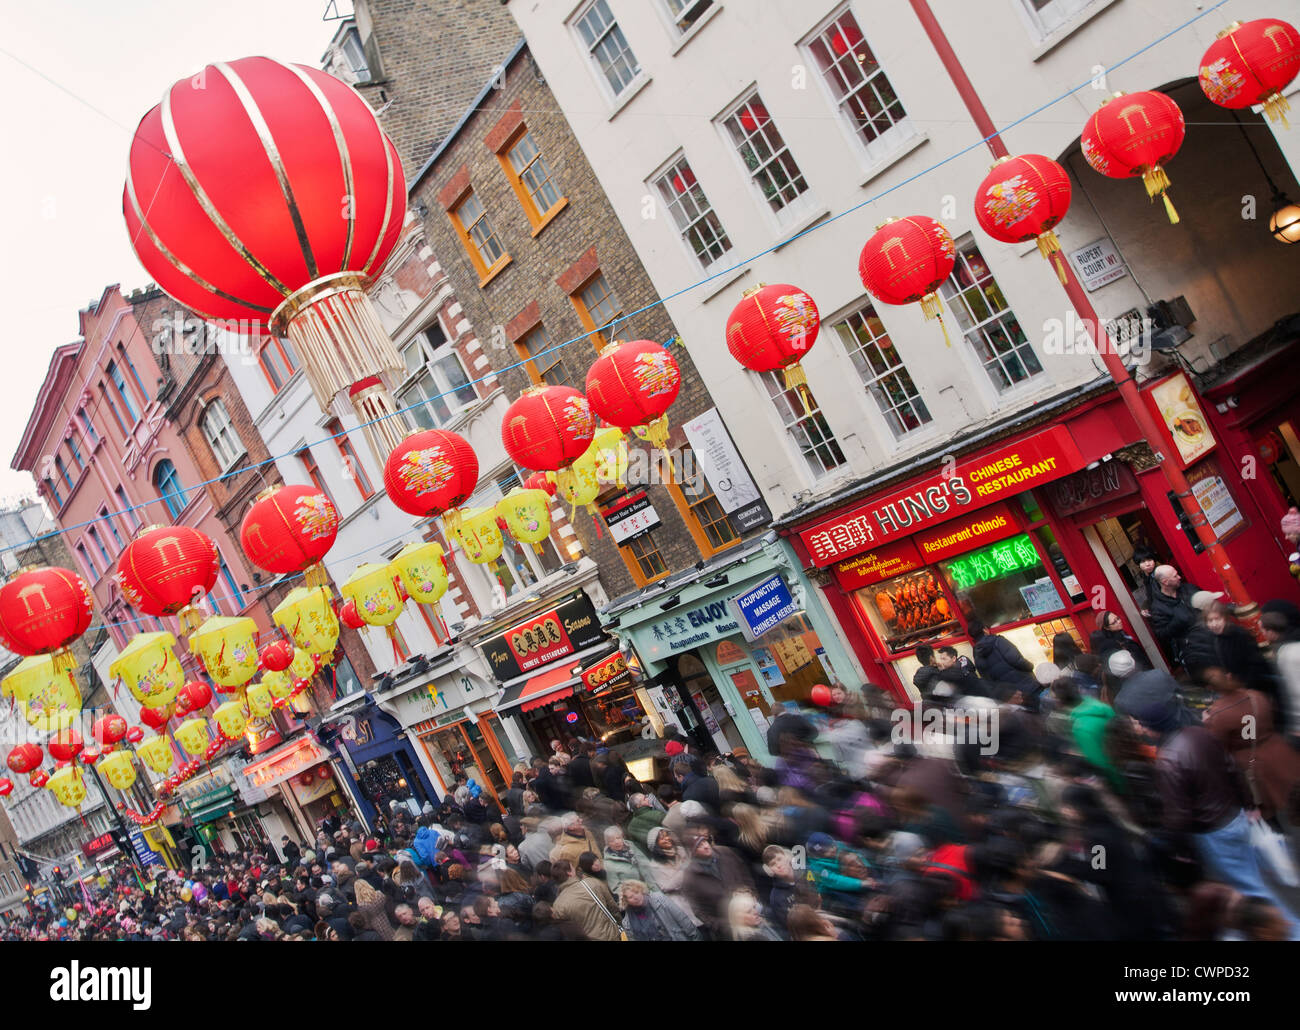 UK. England. London. Crowds in Chinatown during Chinese New Year celebrations. Stock Photo